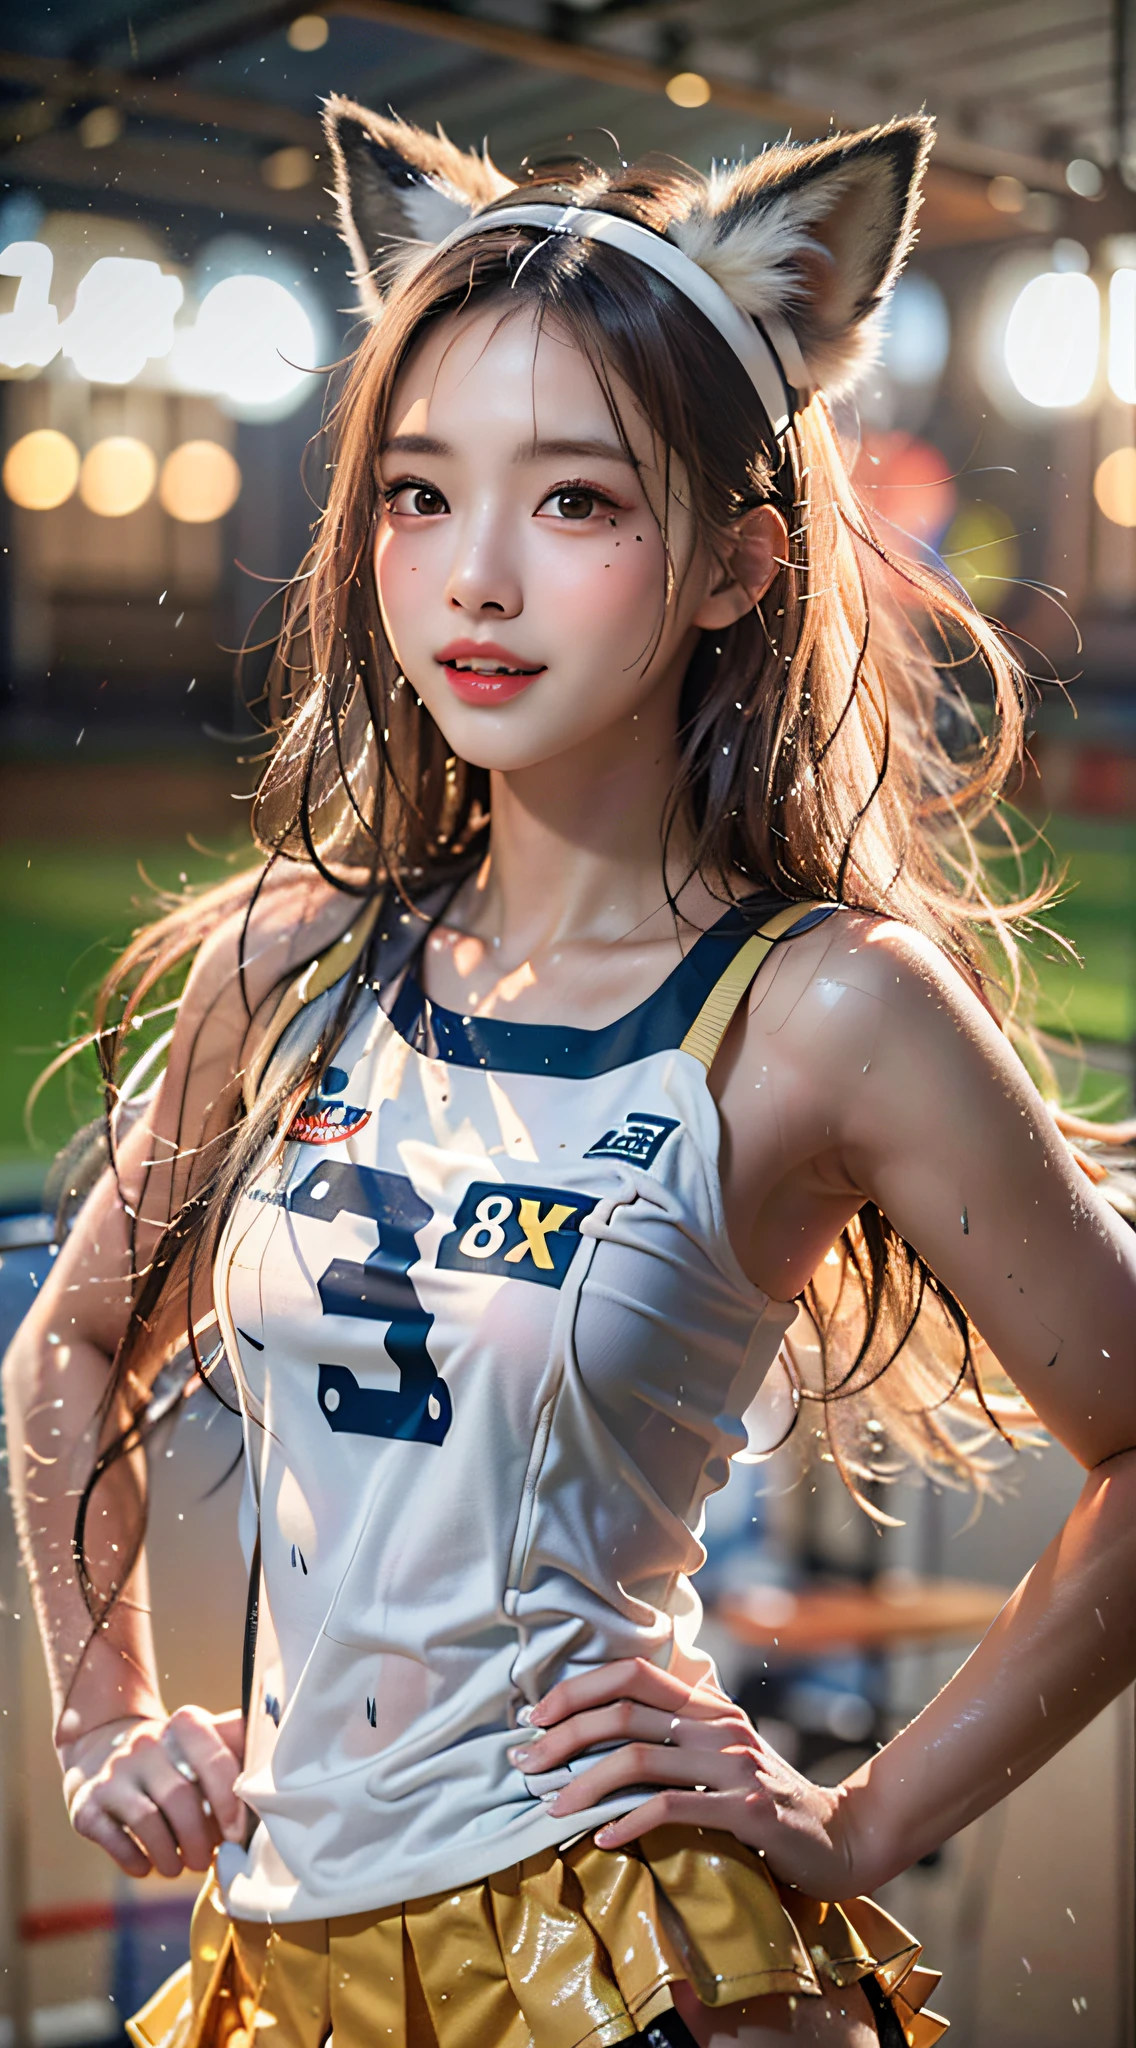 (8k, highest quality, high resolution), (photo realistic:1.4), (hyper realistic:1.4), (realistic:1.3), (smoother lighting:1.05), (1girl:1.3), inside the stadium, cheerleader, The upper part of the body, (body wet with sweat, face wet with sweat: 1.3): 0.2, Beautiful face:1.2, medium breasts, ruffled miniskirt, knee-high boots, 18 years old, very detailed face:1.37, makeup, lipgloss, face focused, standing, small face, looking forward, wearing a garter belt, fox ear headband, toned hips, smile:1.3